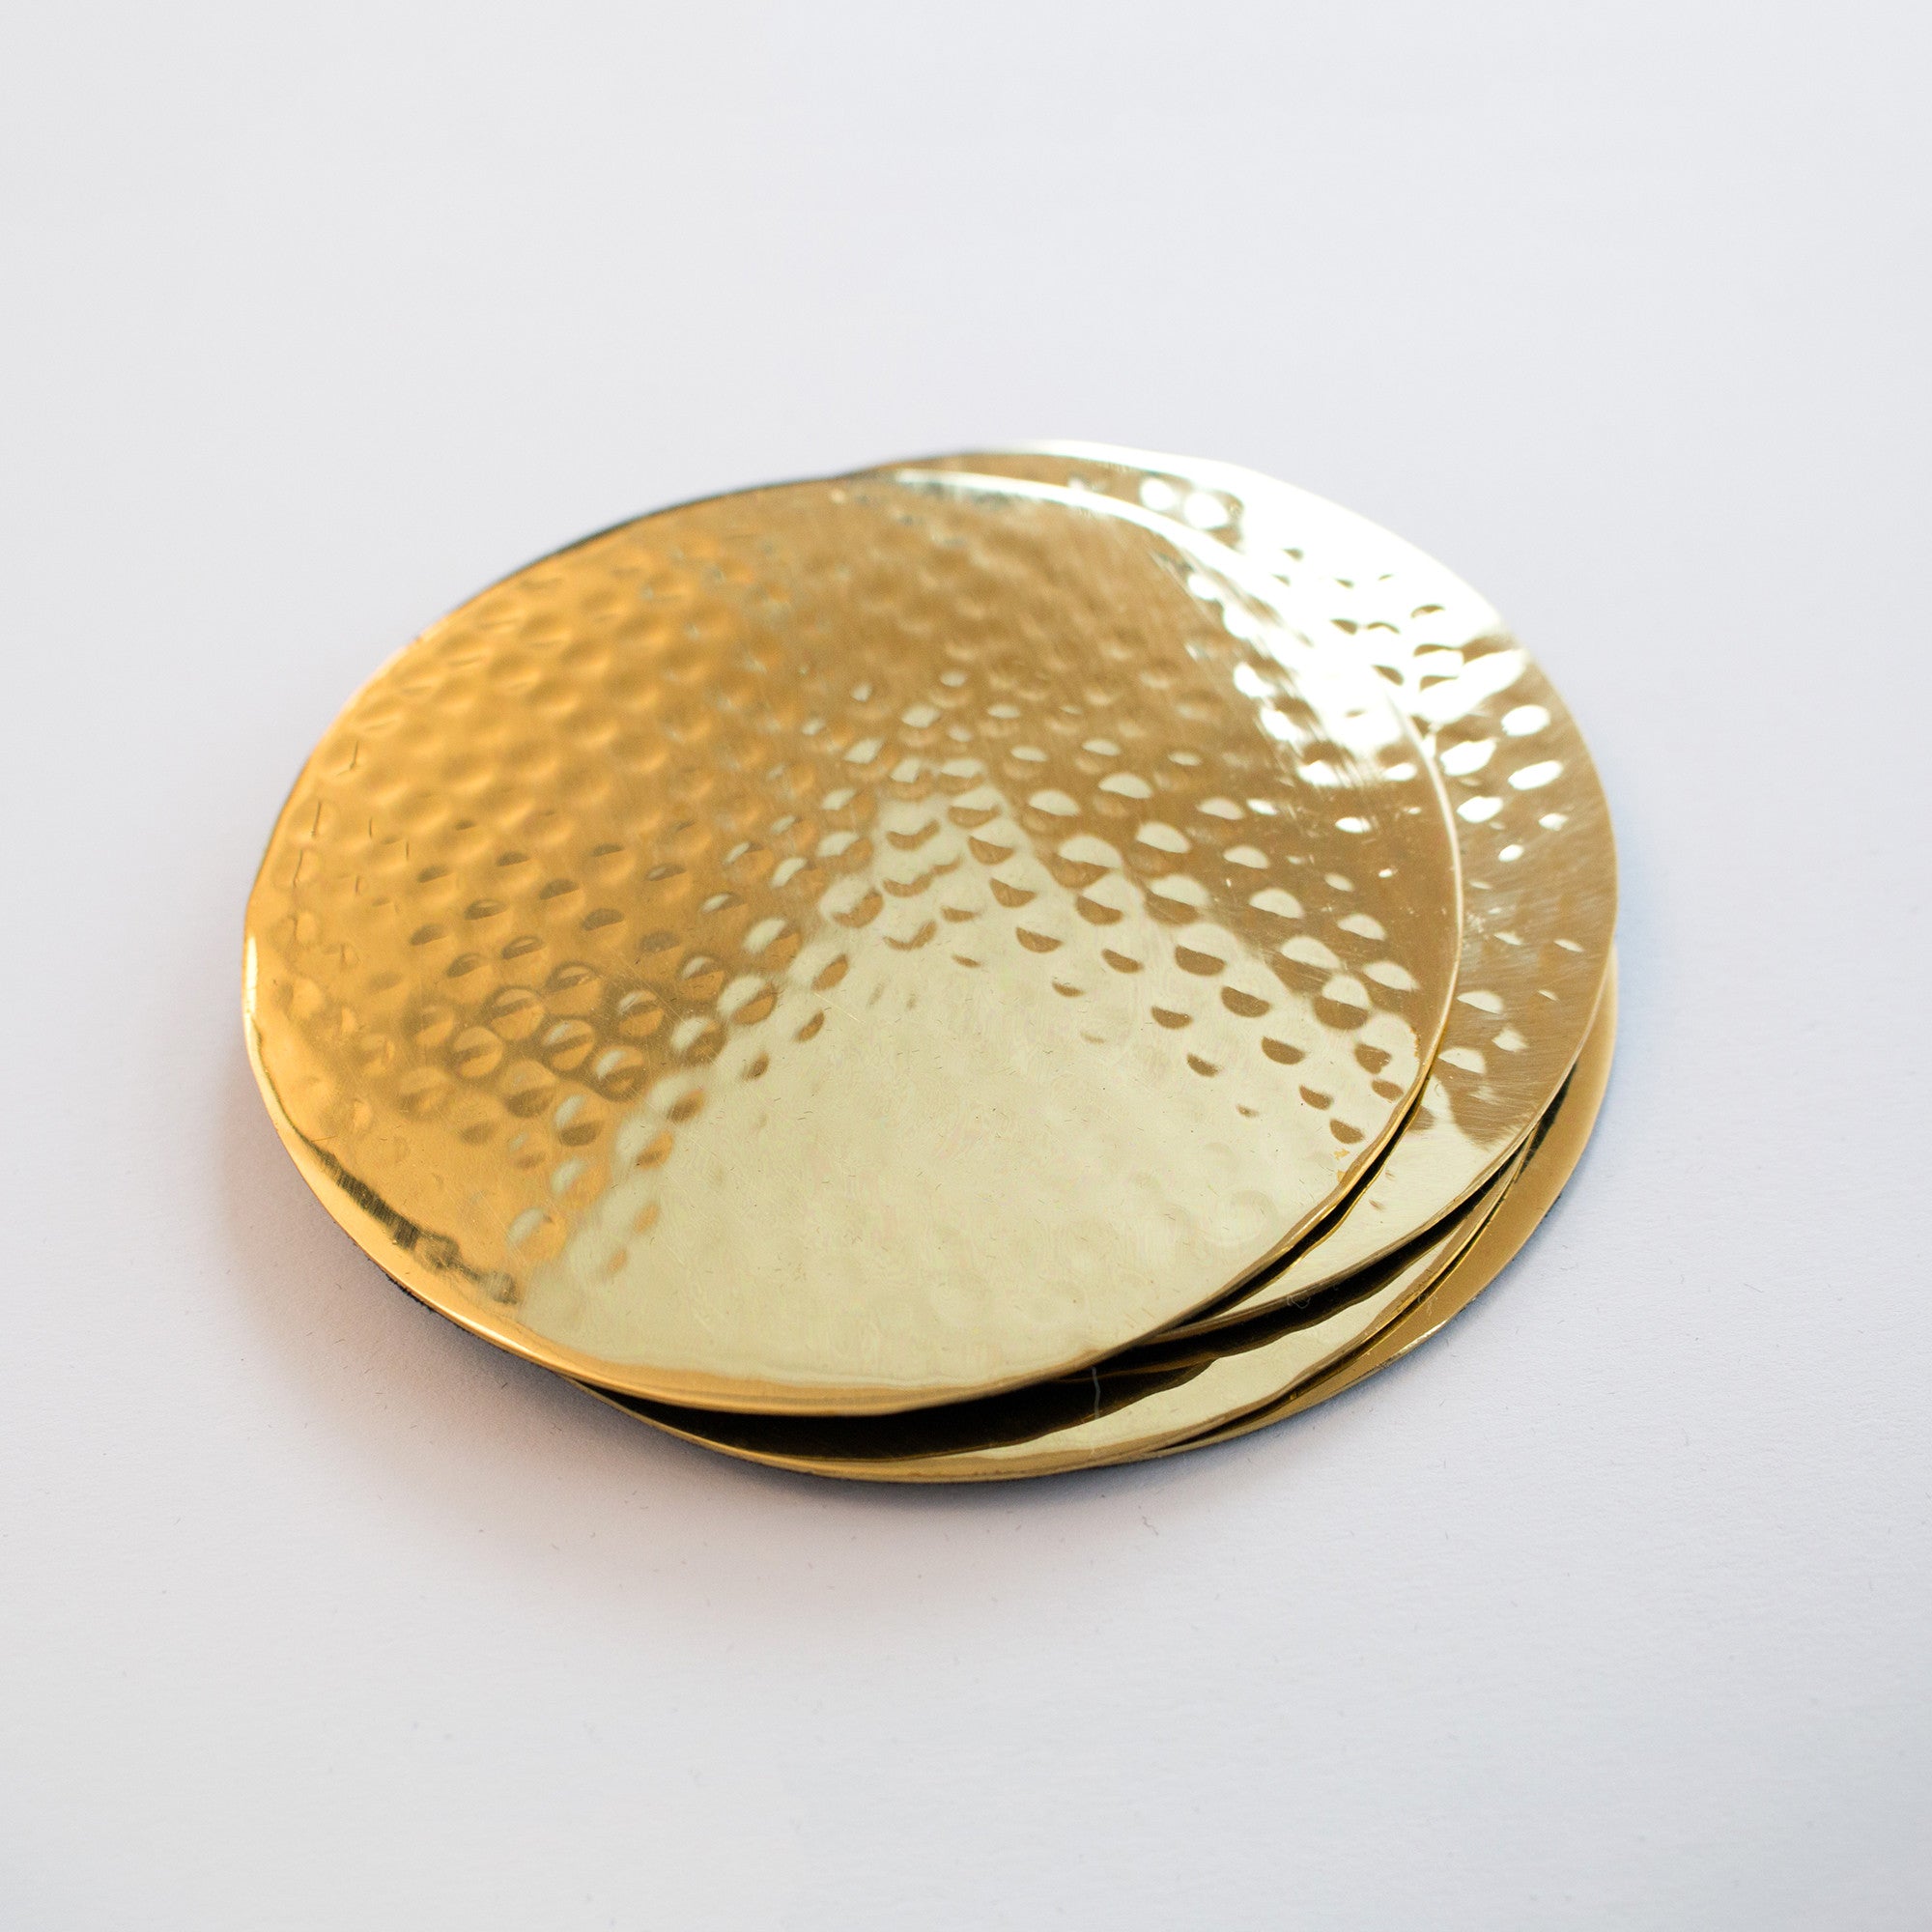 Hammered Brass Coasters (Set of 4) - The VinePair Store